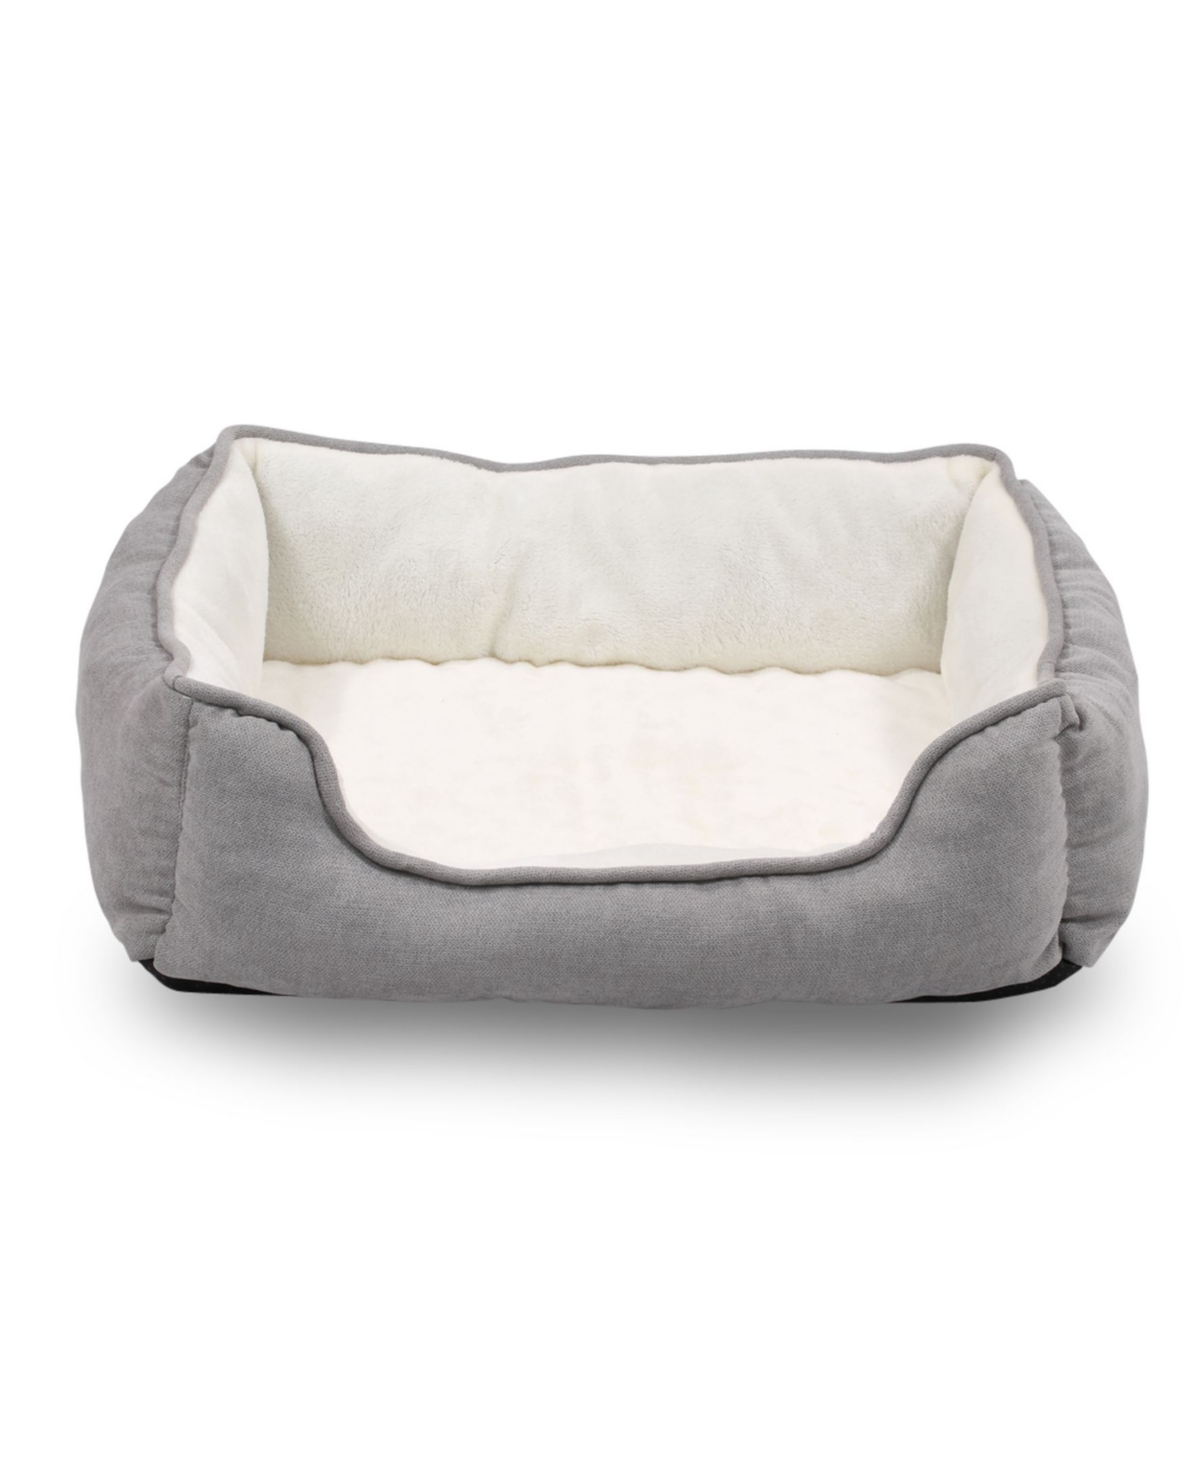 Happycare Textiles Orthopedic Rectangle Bolster Pet Bed, 25"x21" Super Soft Plush Dog Bed - Gray